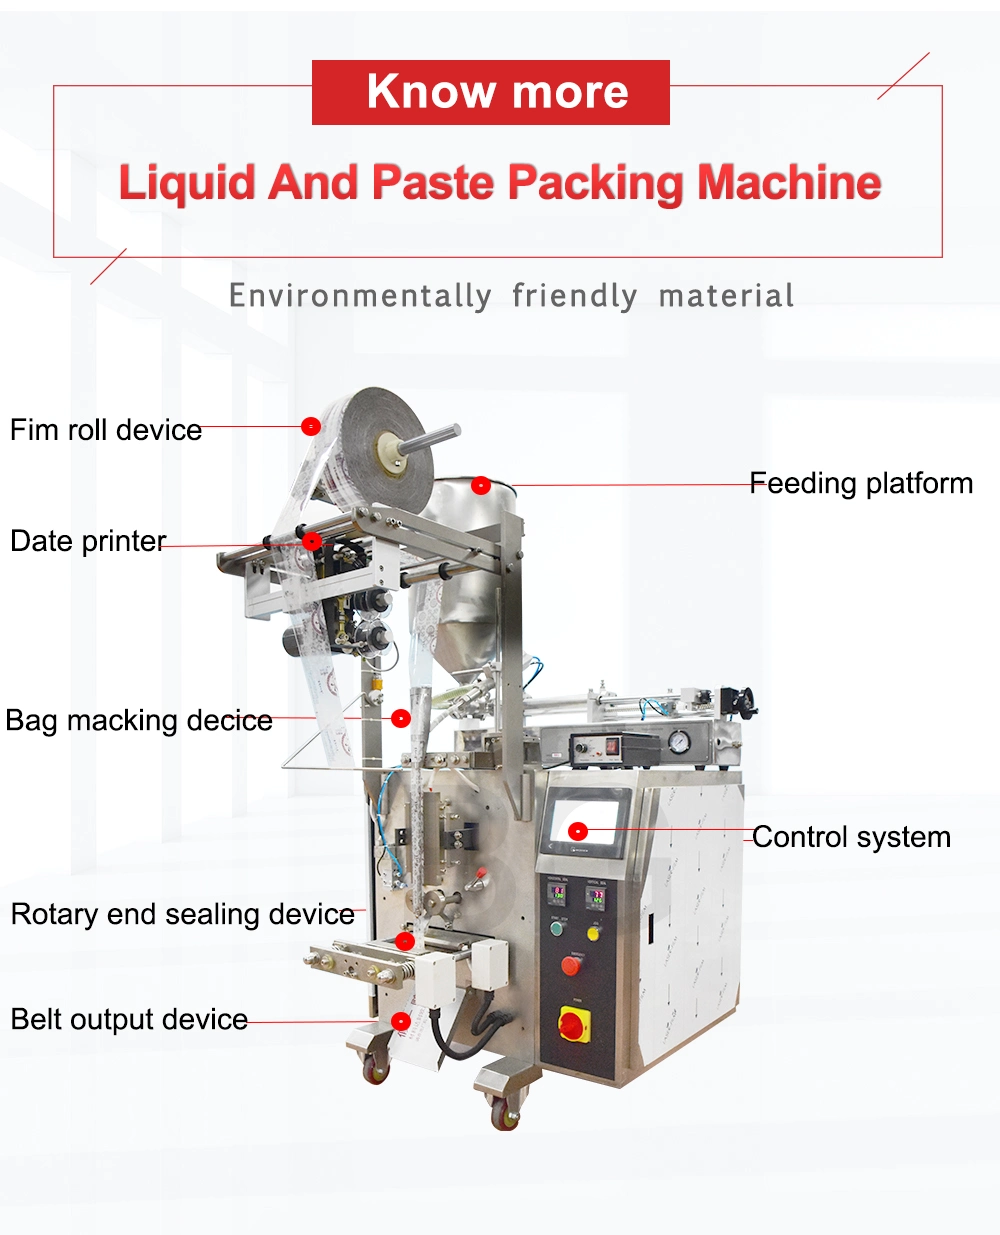 Bg Multi-Function Packaging Machines Cooking Oil Packing Machine Ketchup Packing Machine for Small Business